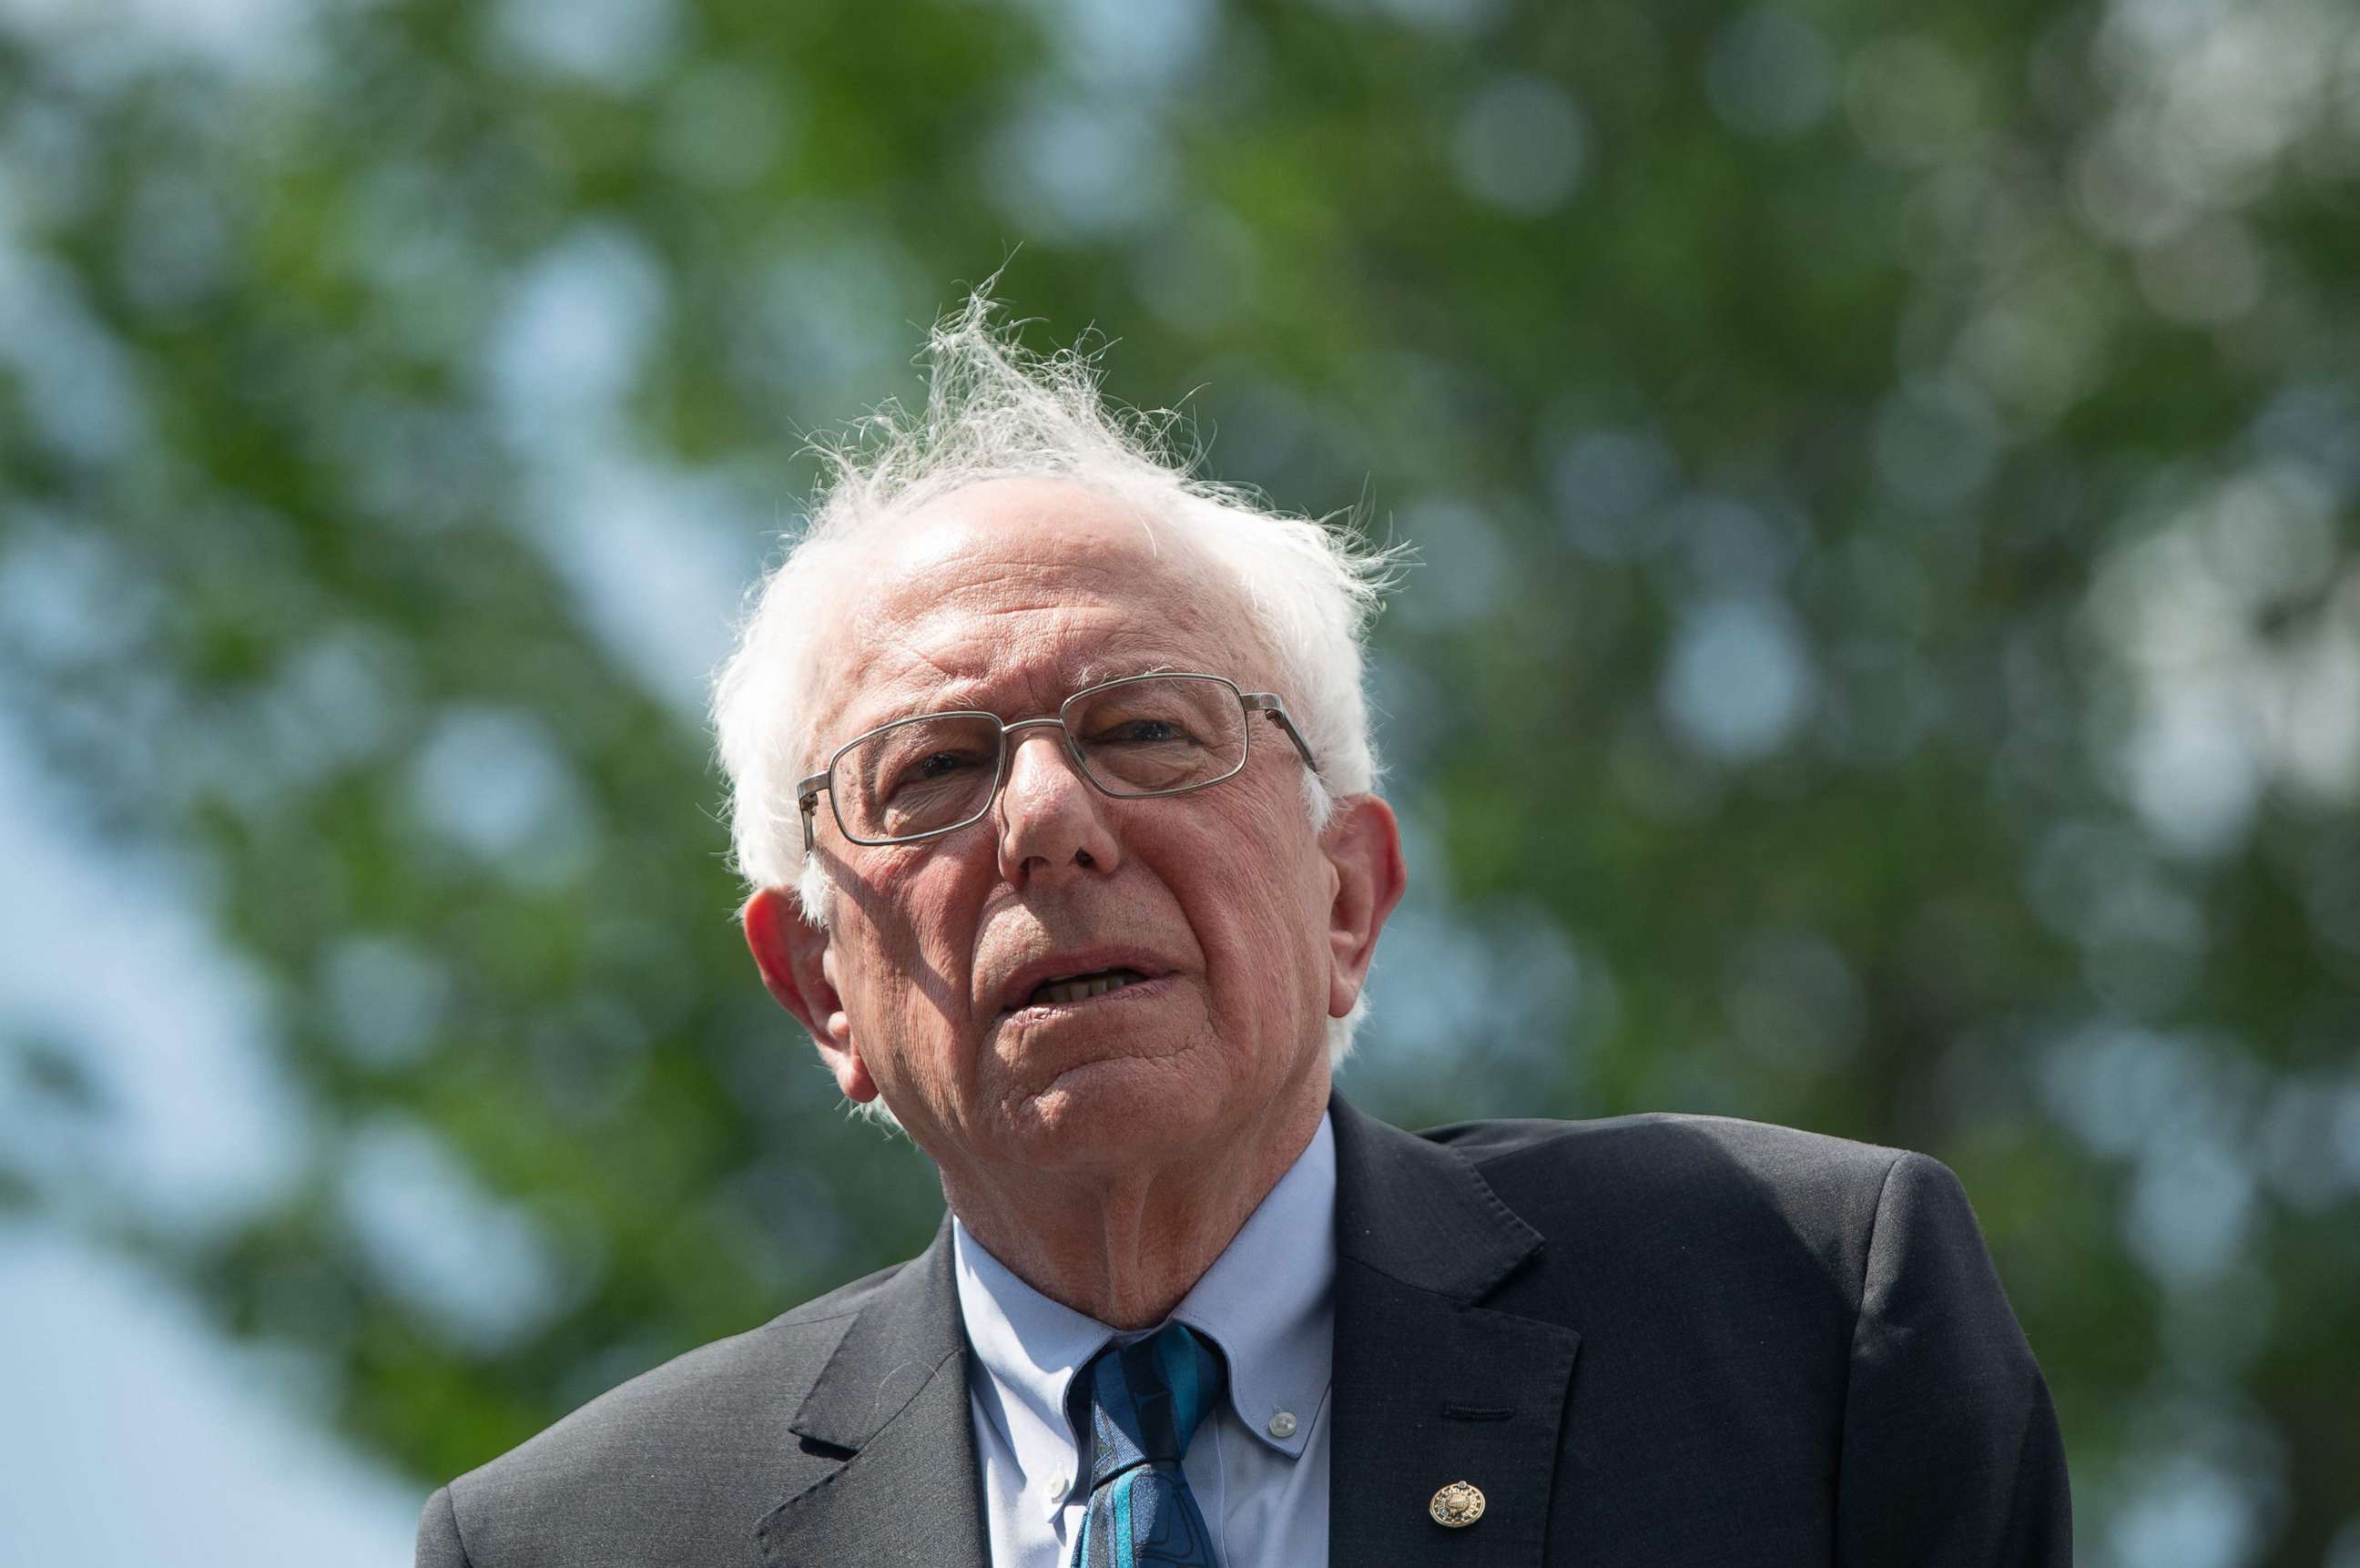 PHOTO:Bernie Sanders attends a press conference to introduce college affordability legislation outside the US Capitol in Washington, D.C., June 24, 2019.